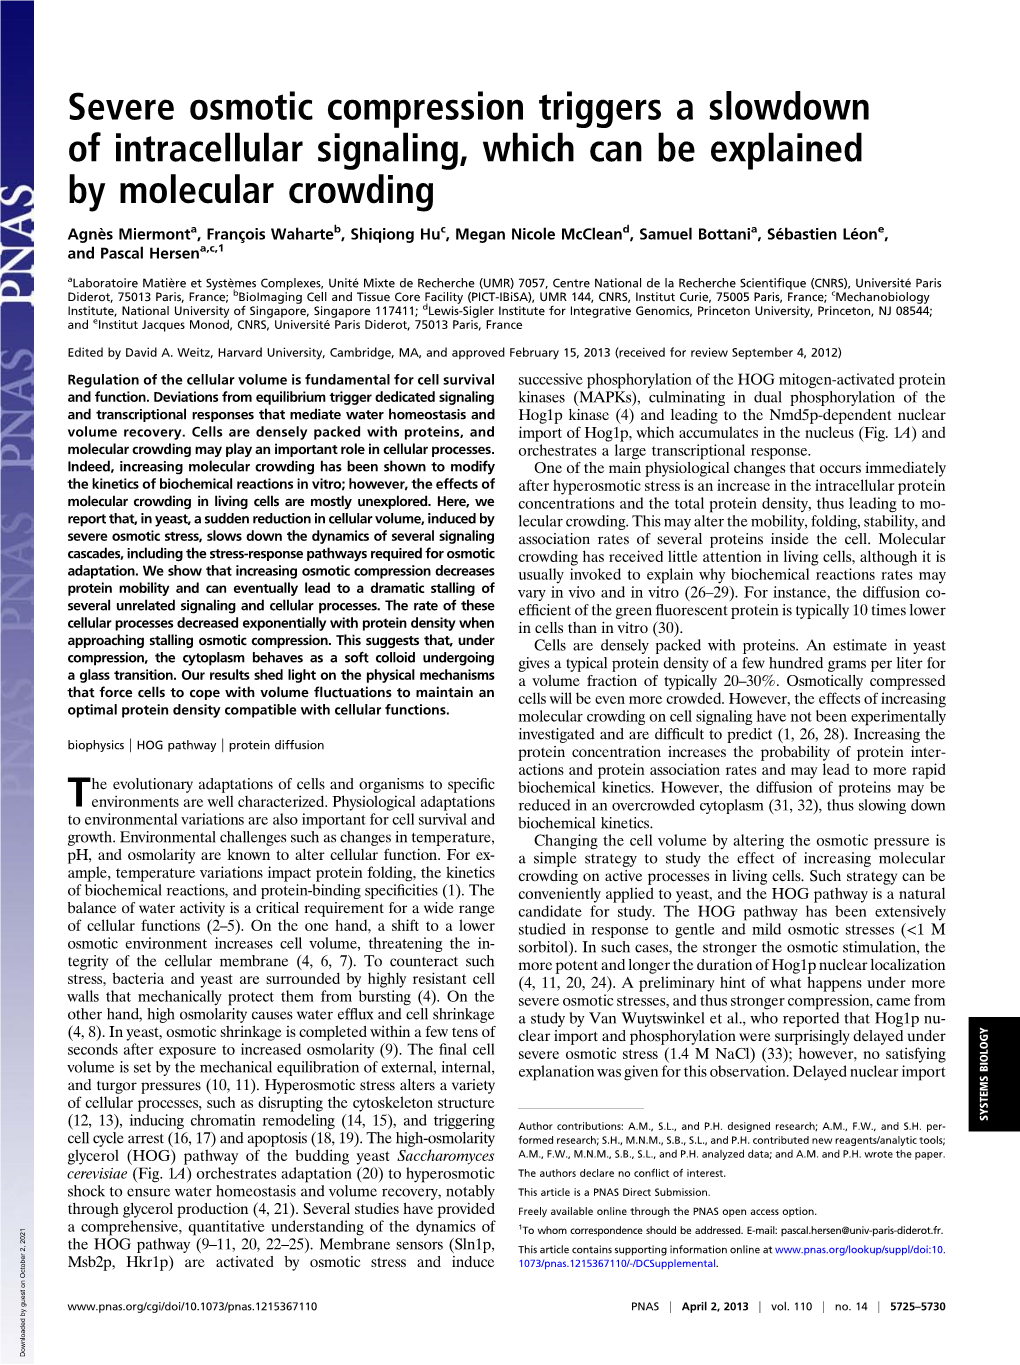 Severe Osmotic Compression Triggers a Slowdown of Intracellular Signaling, Which Can Be Explained by Molecular Crowding